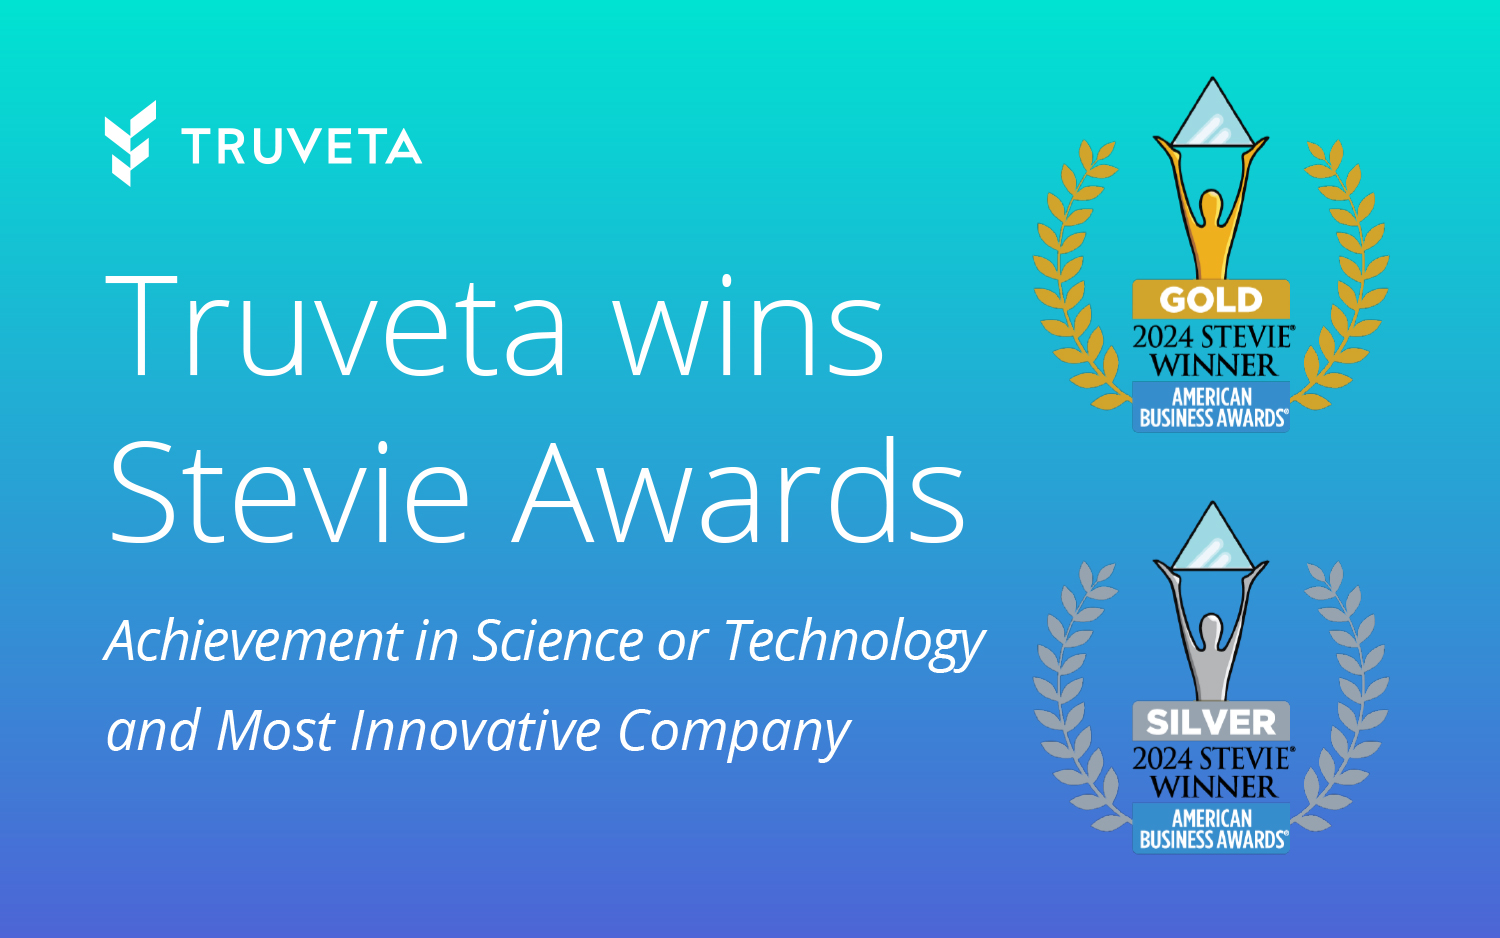 Truveta was named winner of a Gold 2024 Stevice Award for Achievement in Technology, as well as a Silver 2024 Stevie Award for Most Innovative Company.